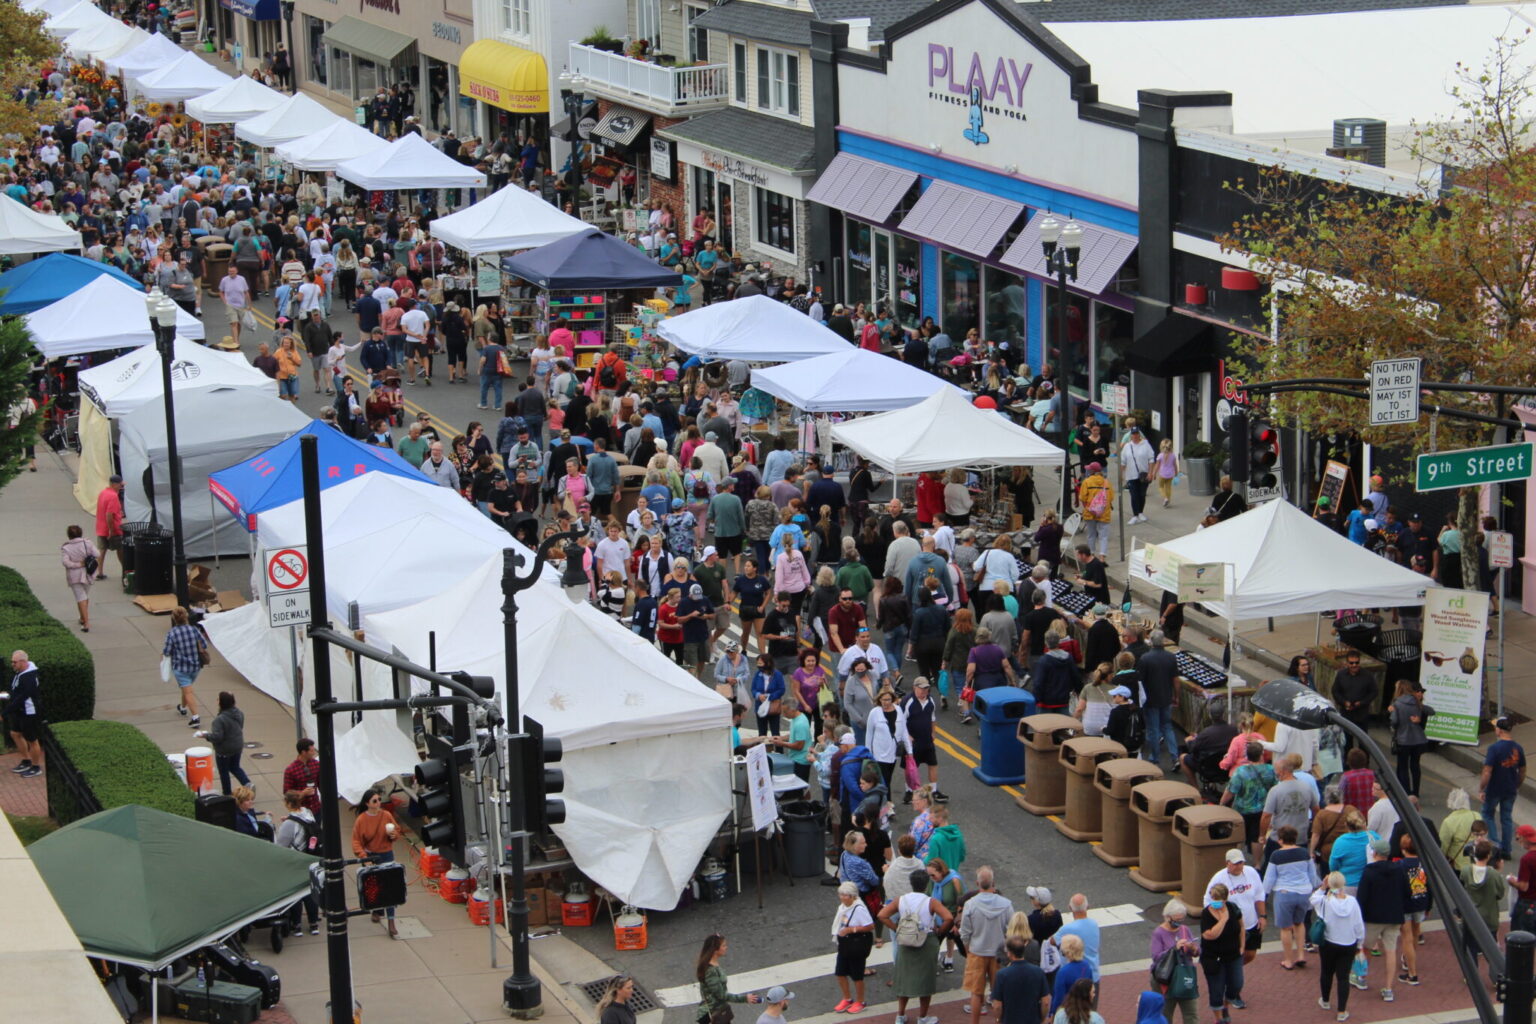 WHAT’S HAPPENING IN OCEAN CITY Fall Block Party and Fireworks Set for